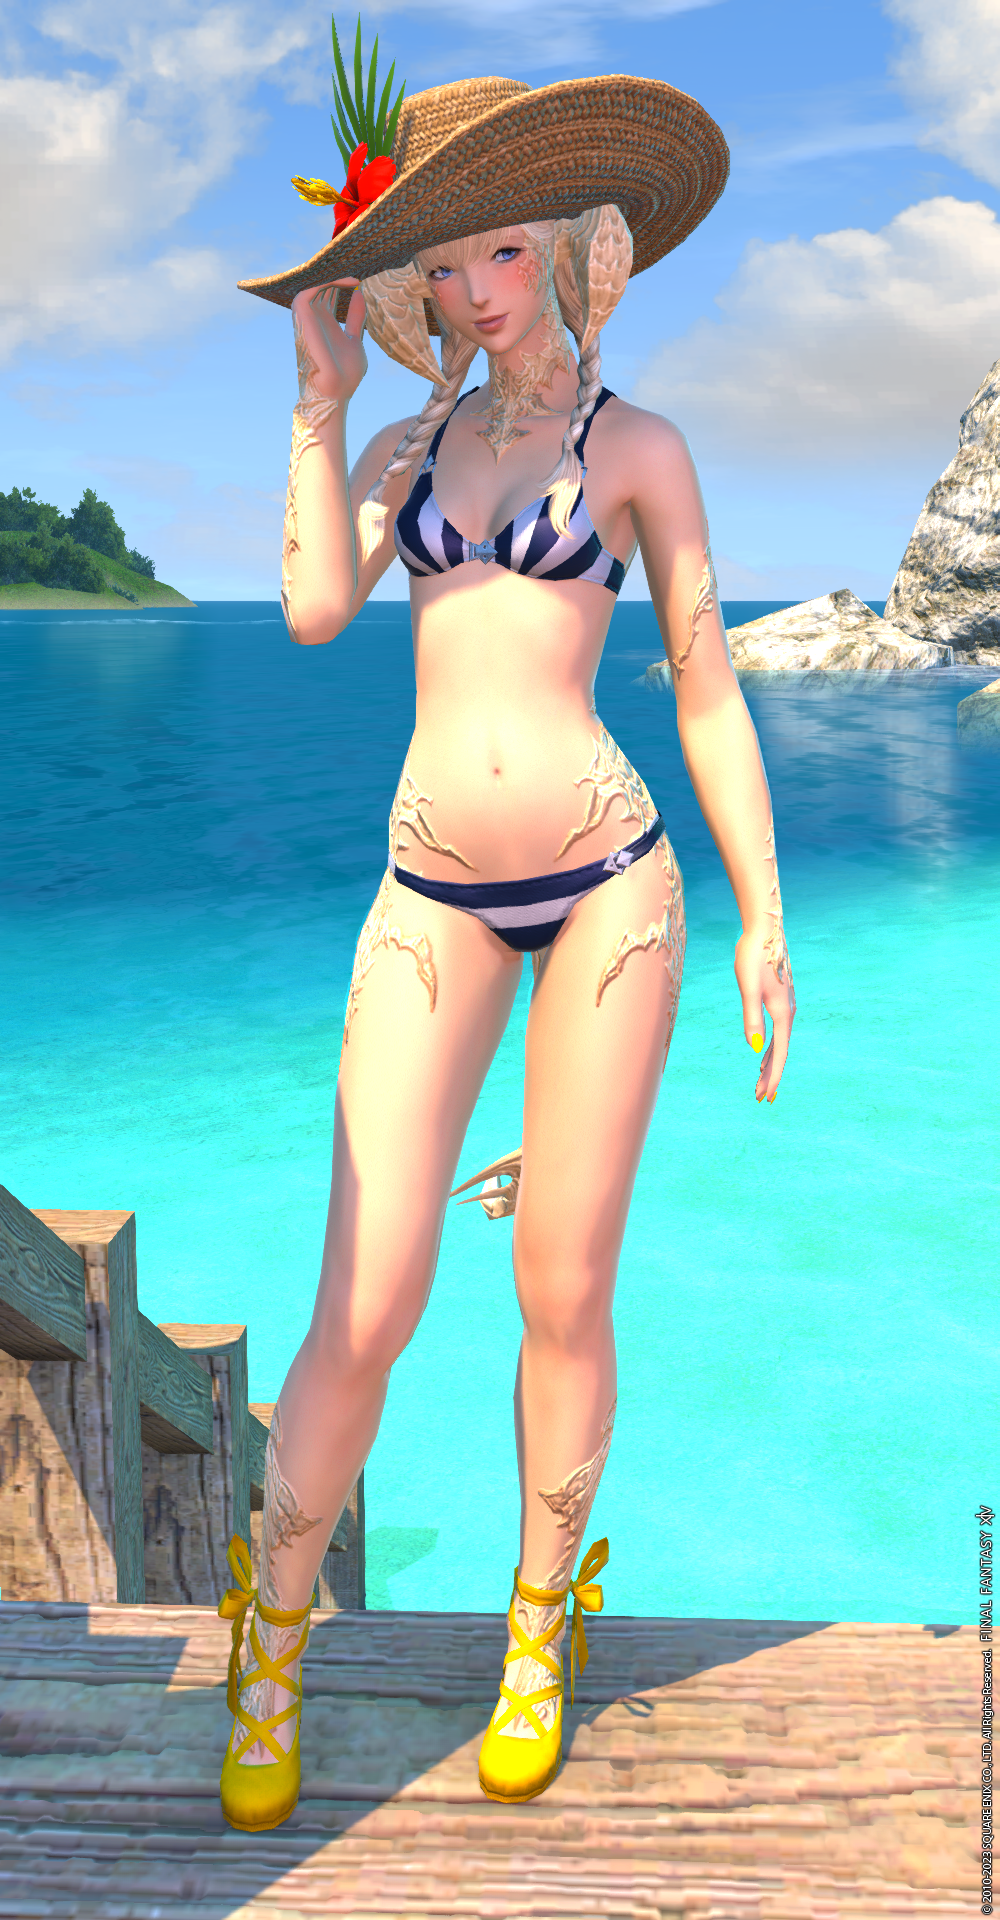 An image of an Au Ra from FFXIV. She is wearing a striped bathing suit and standing in front of the ocean.